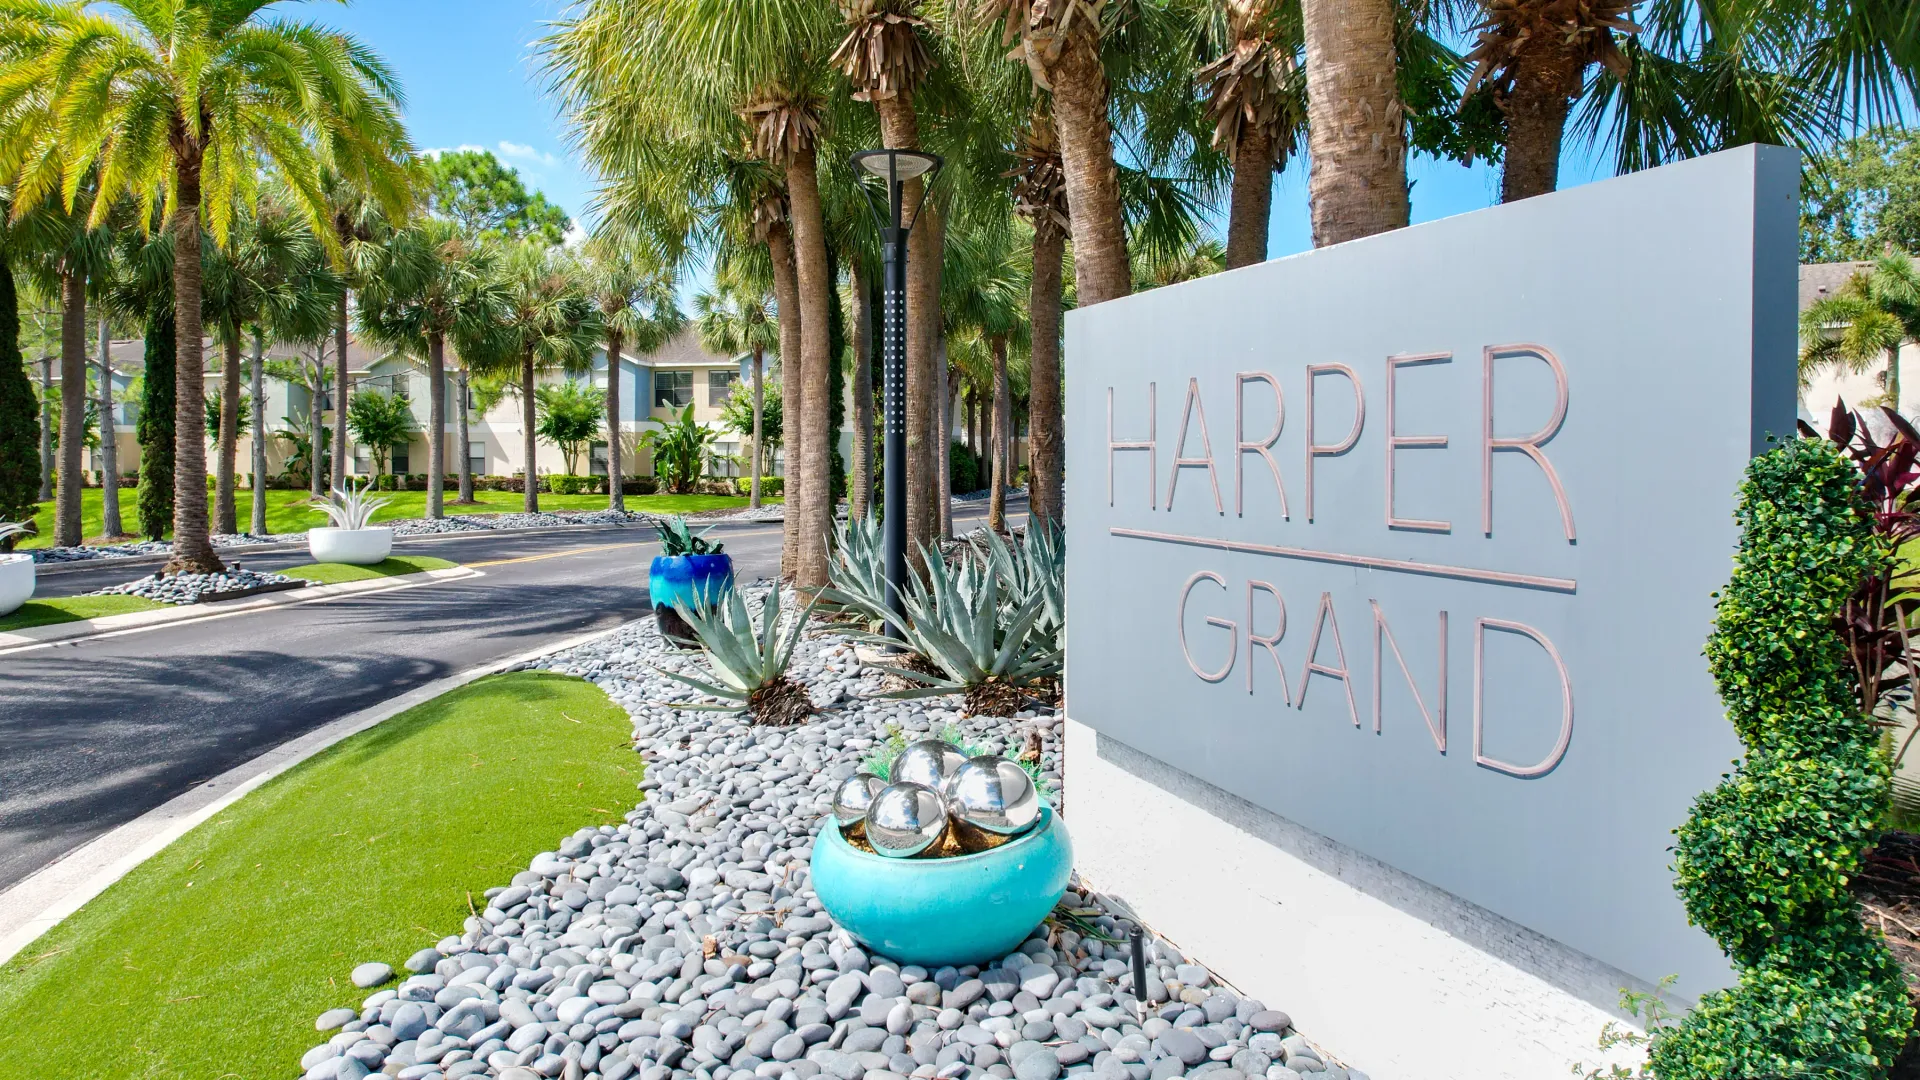 Entrance sign of Harper Grand Apartments with lush landscaping and palm trees.